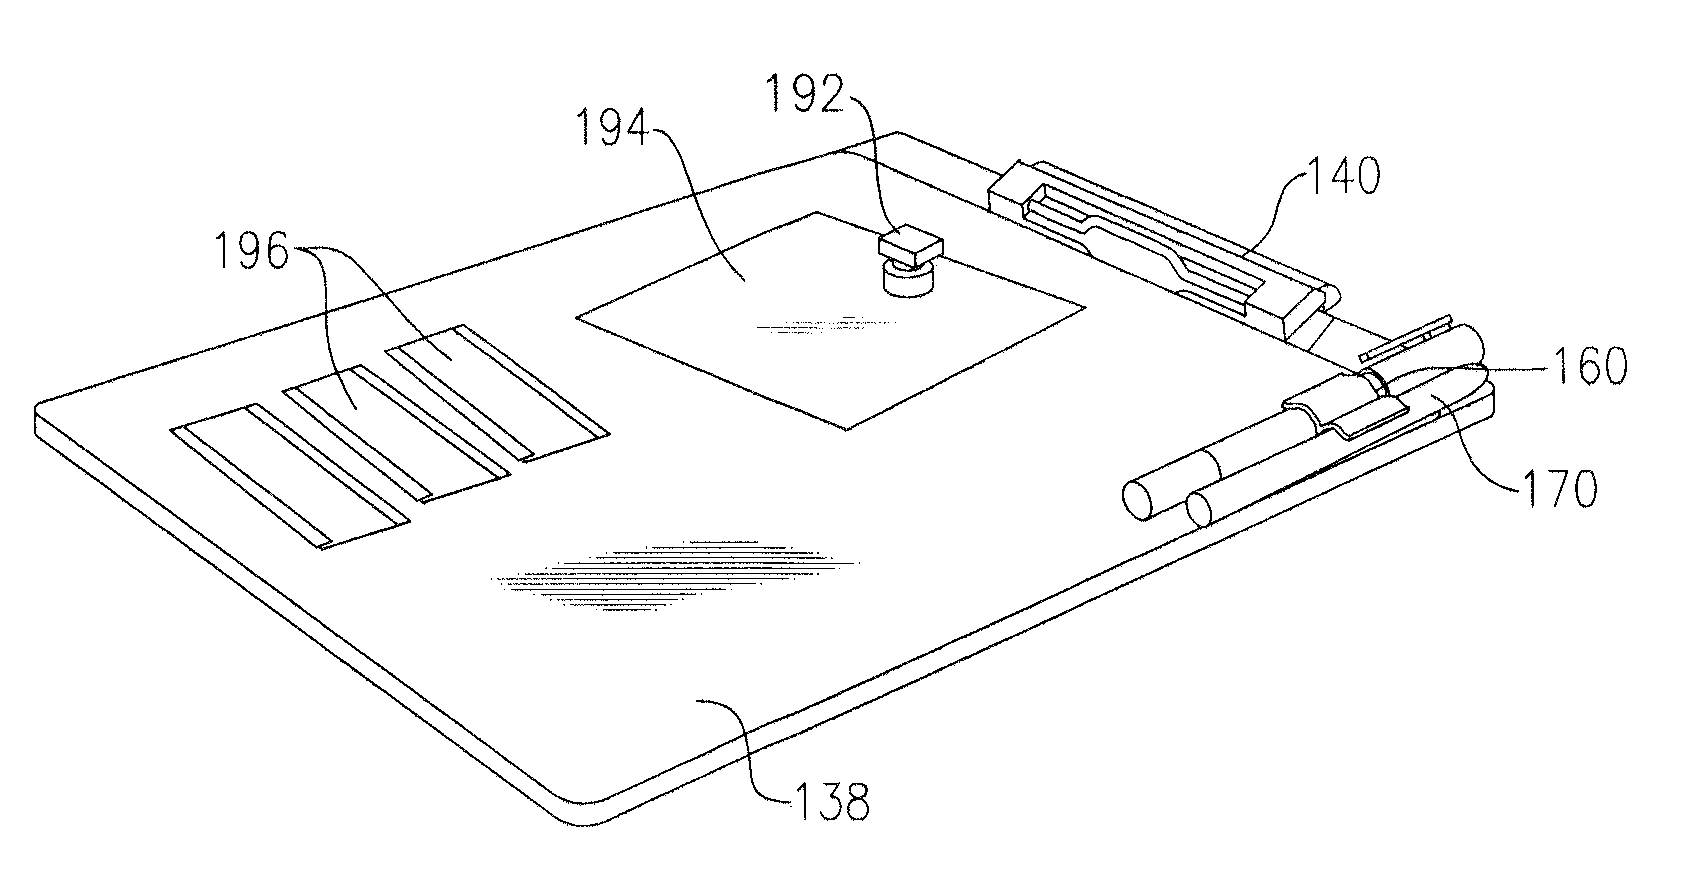 Magnetically supported clipboard having dry-erasable writing surface